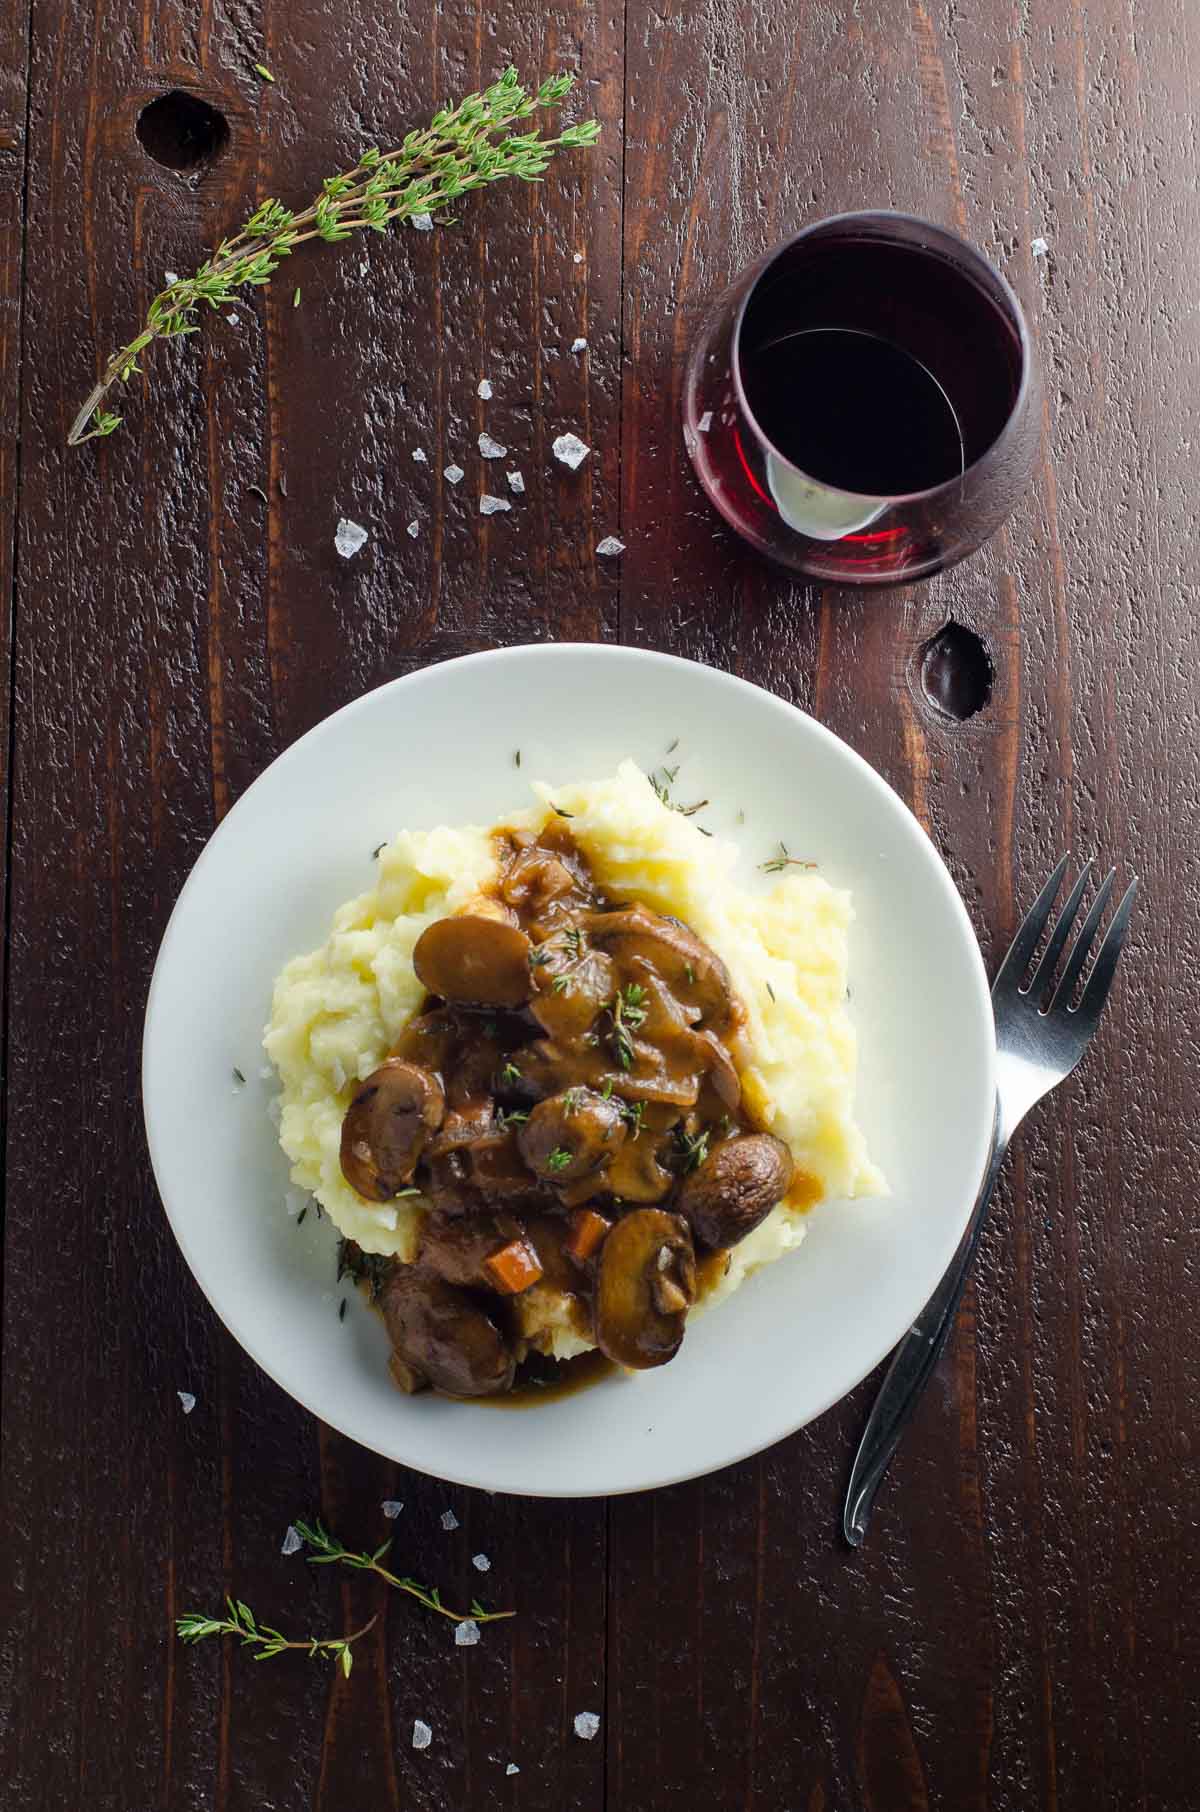 mushroom bourguignon (vegan option) on a plate with mashed potatoes and a glass of red wine